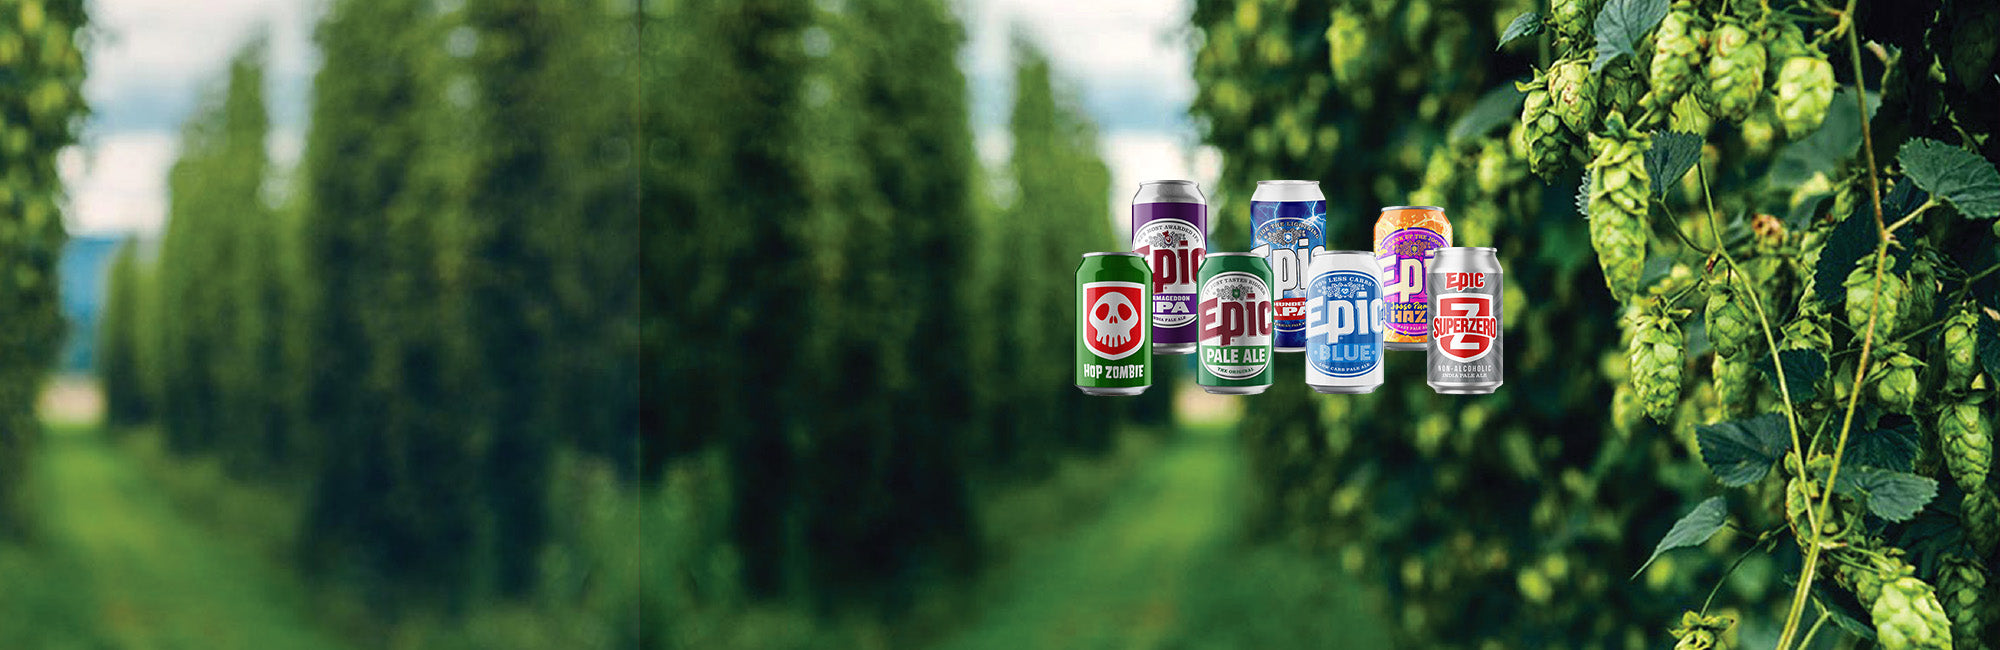 A lineup of epic core range beer cans on a backdrop of hop vines